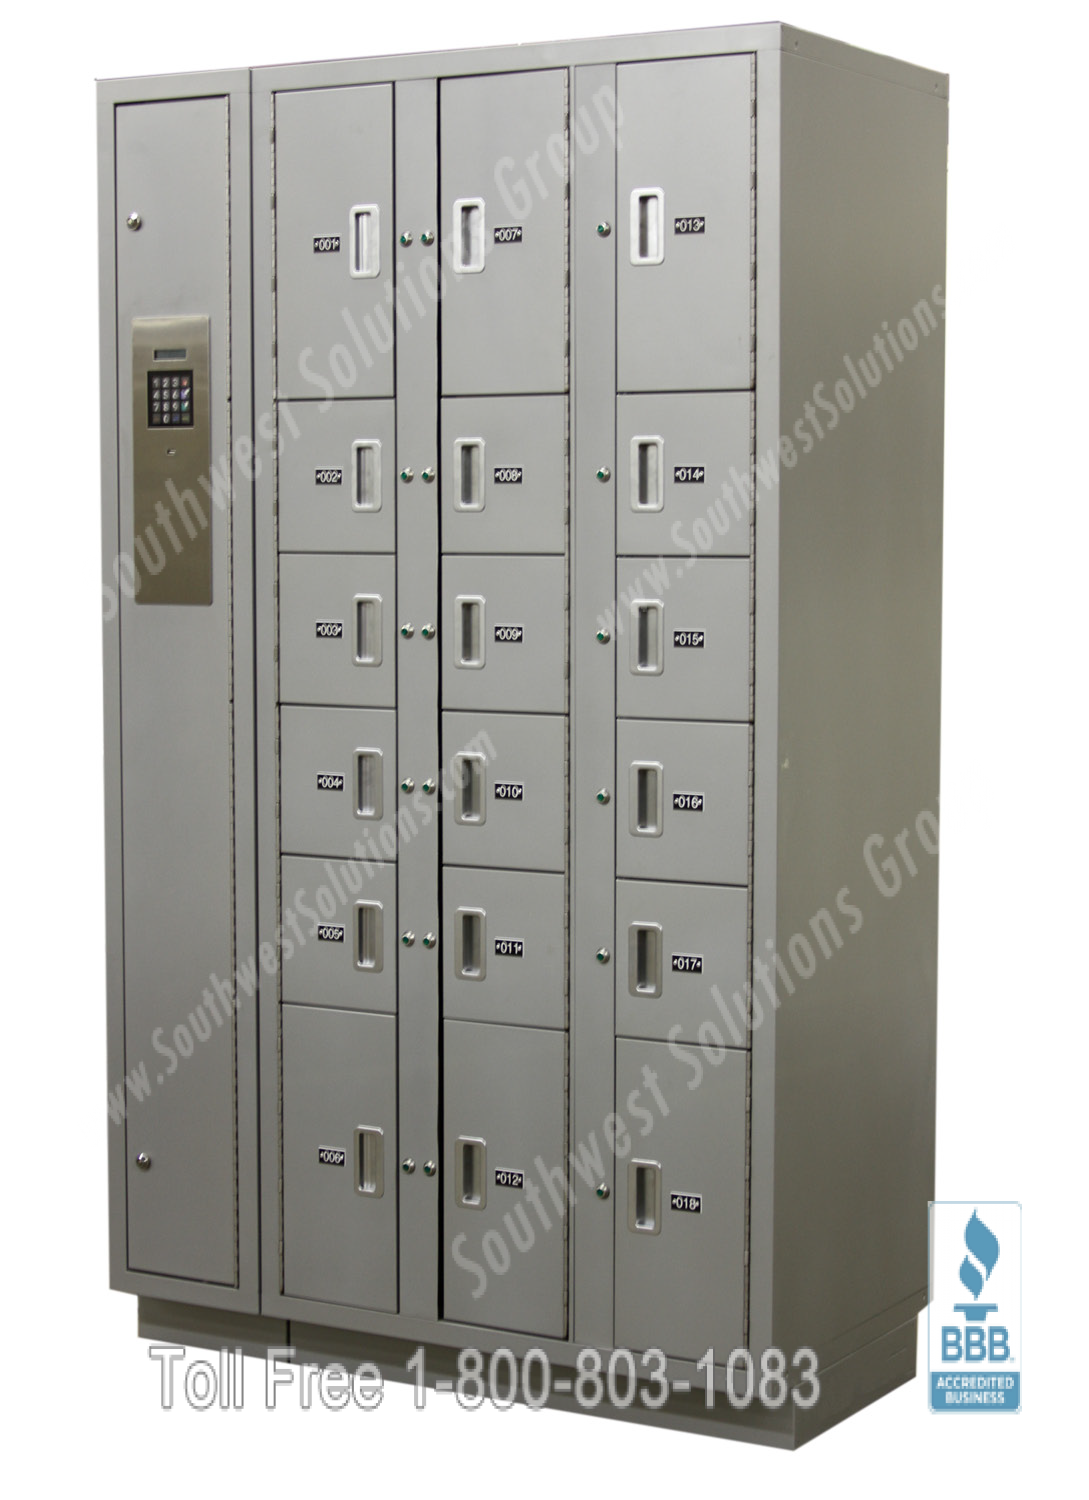 Spacesaver High Security Pharmacy Storage Cabinets